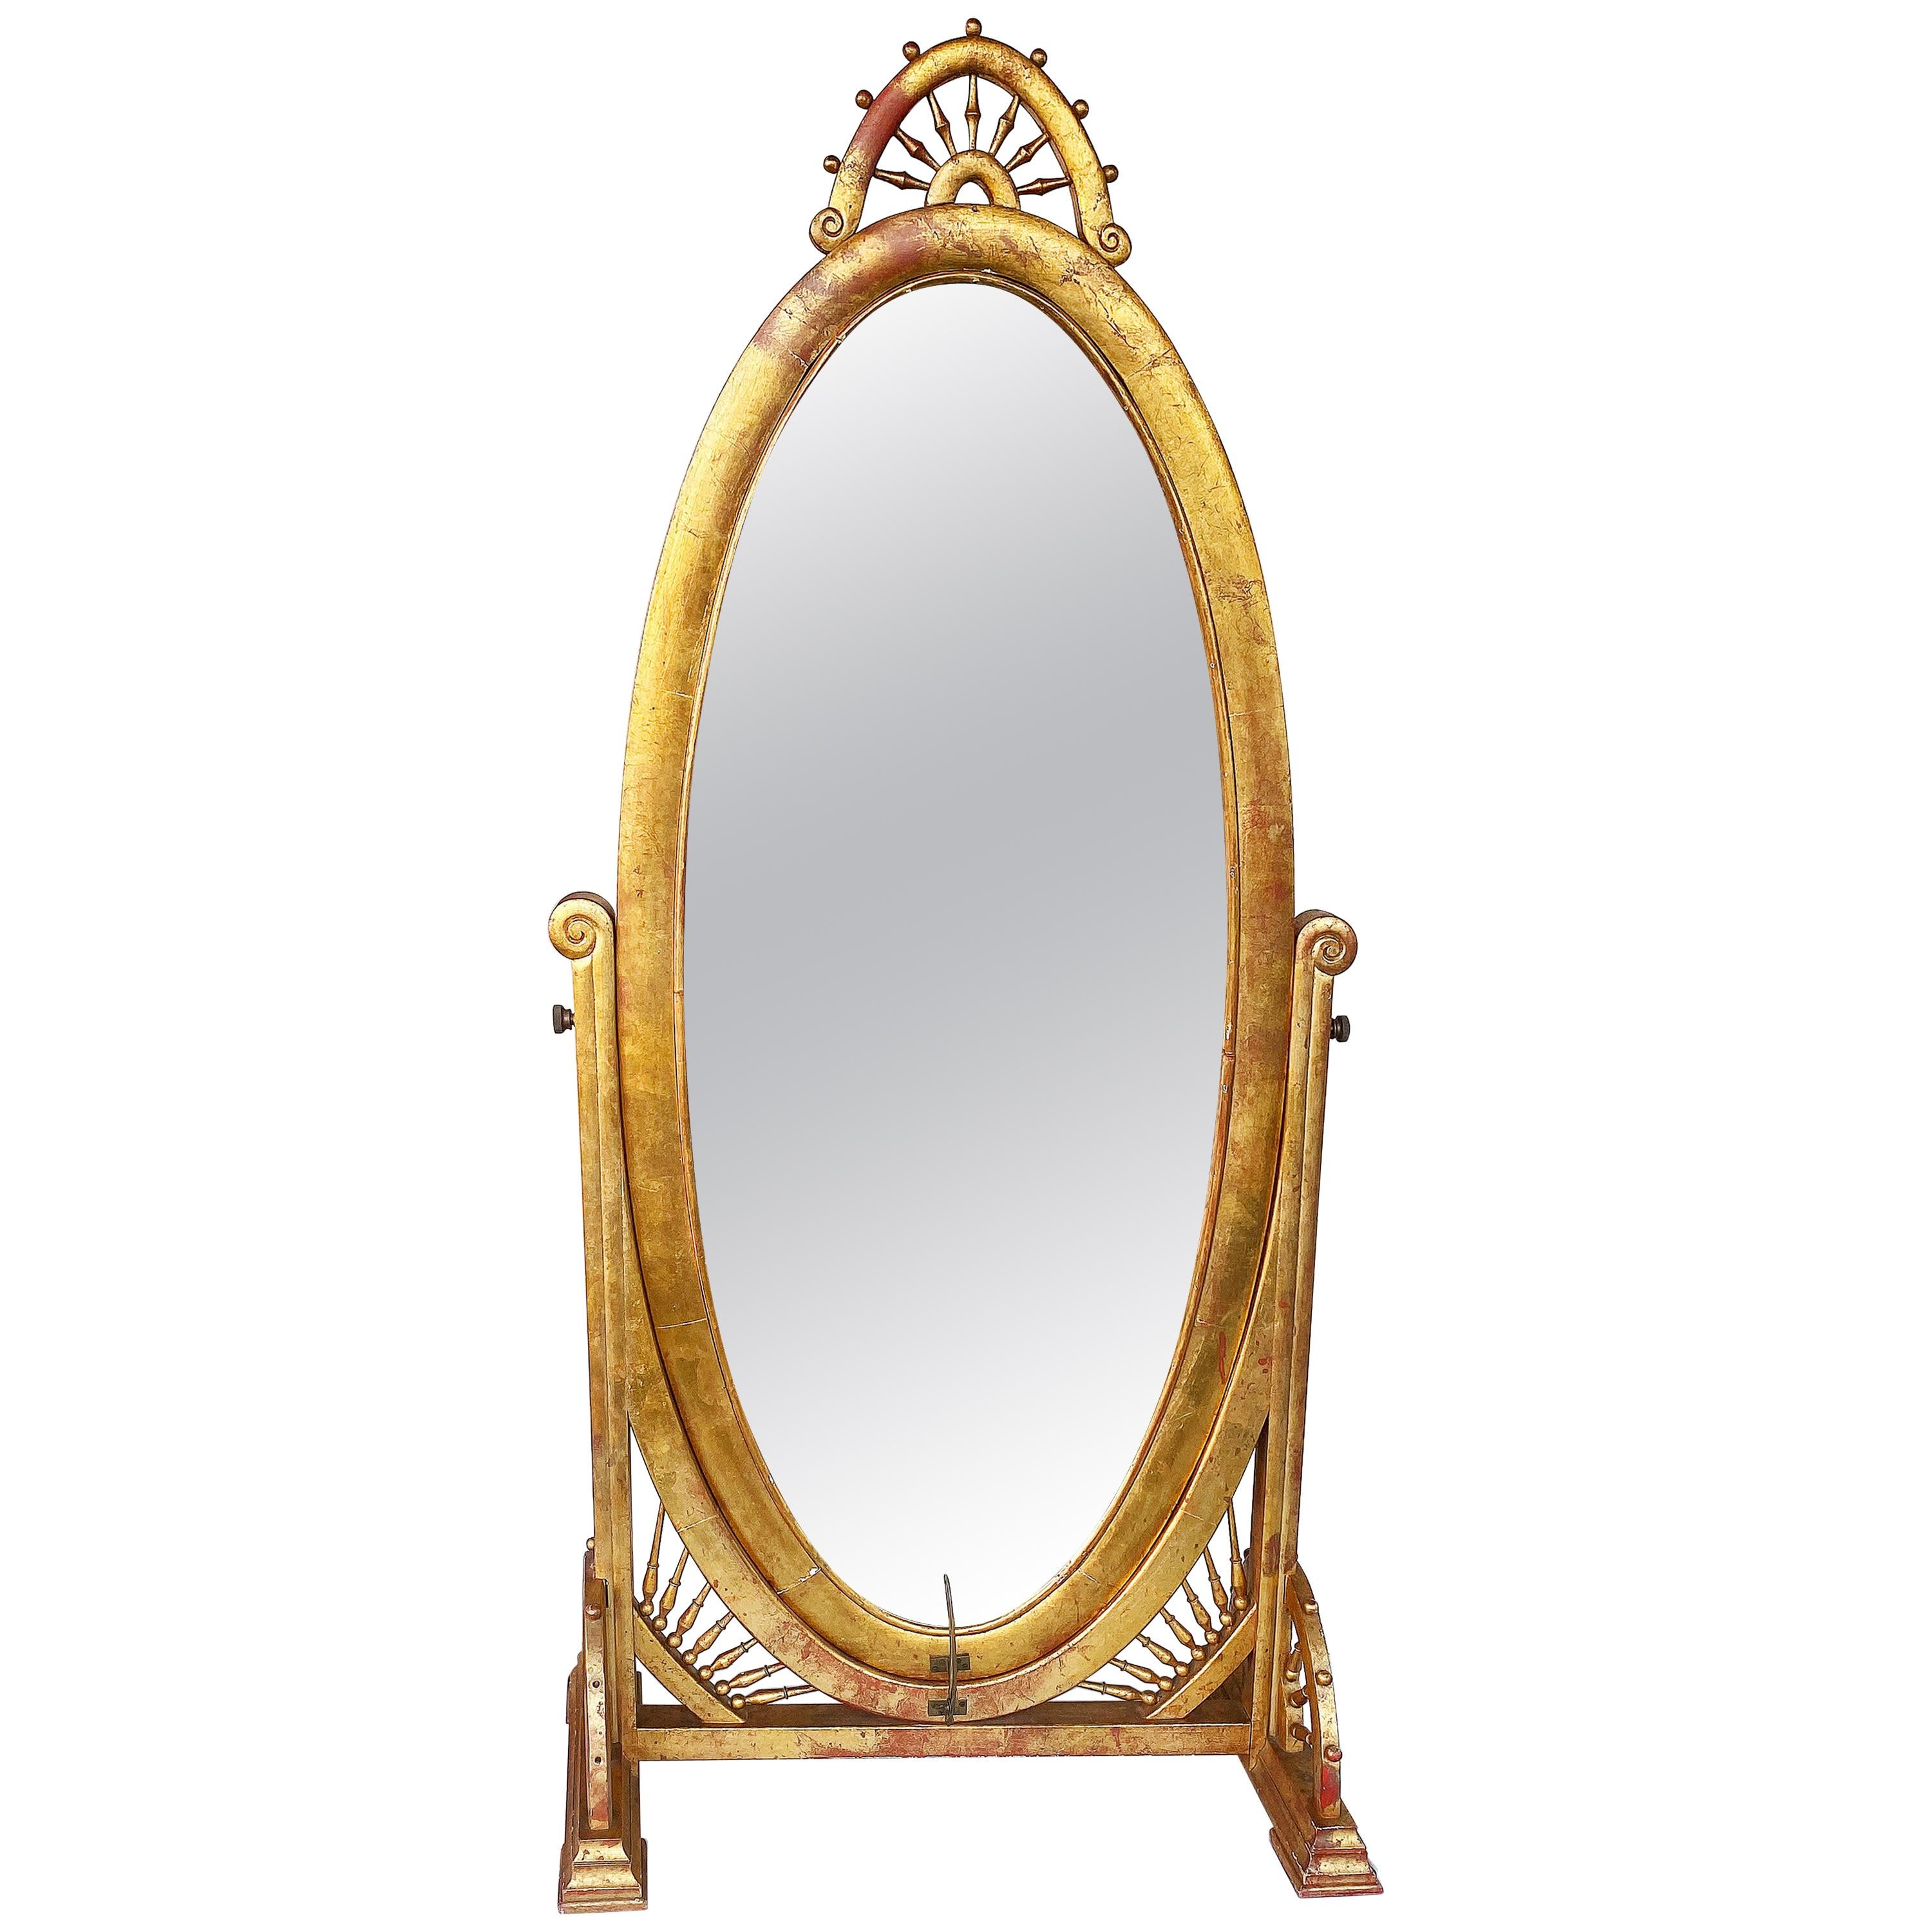 19th Century Victorian Giltwood Cheval Mirror on Stand with Caned Back For Sale